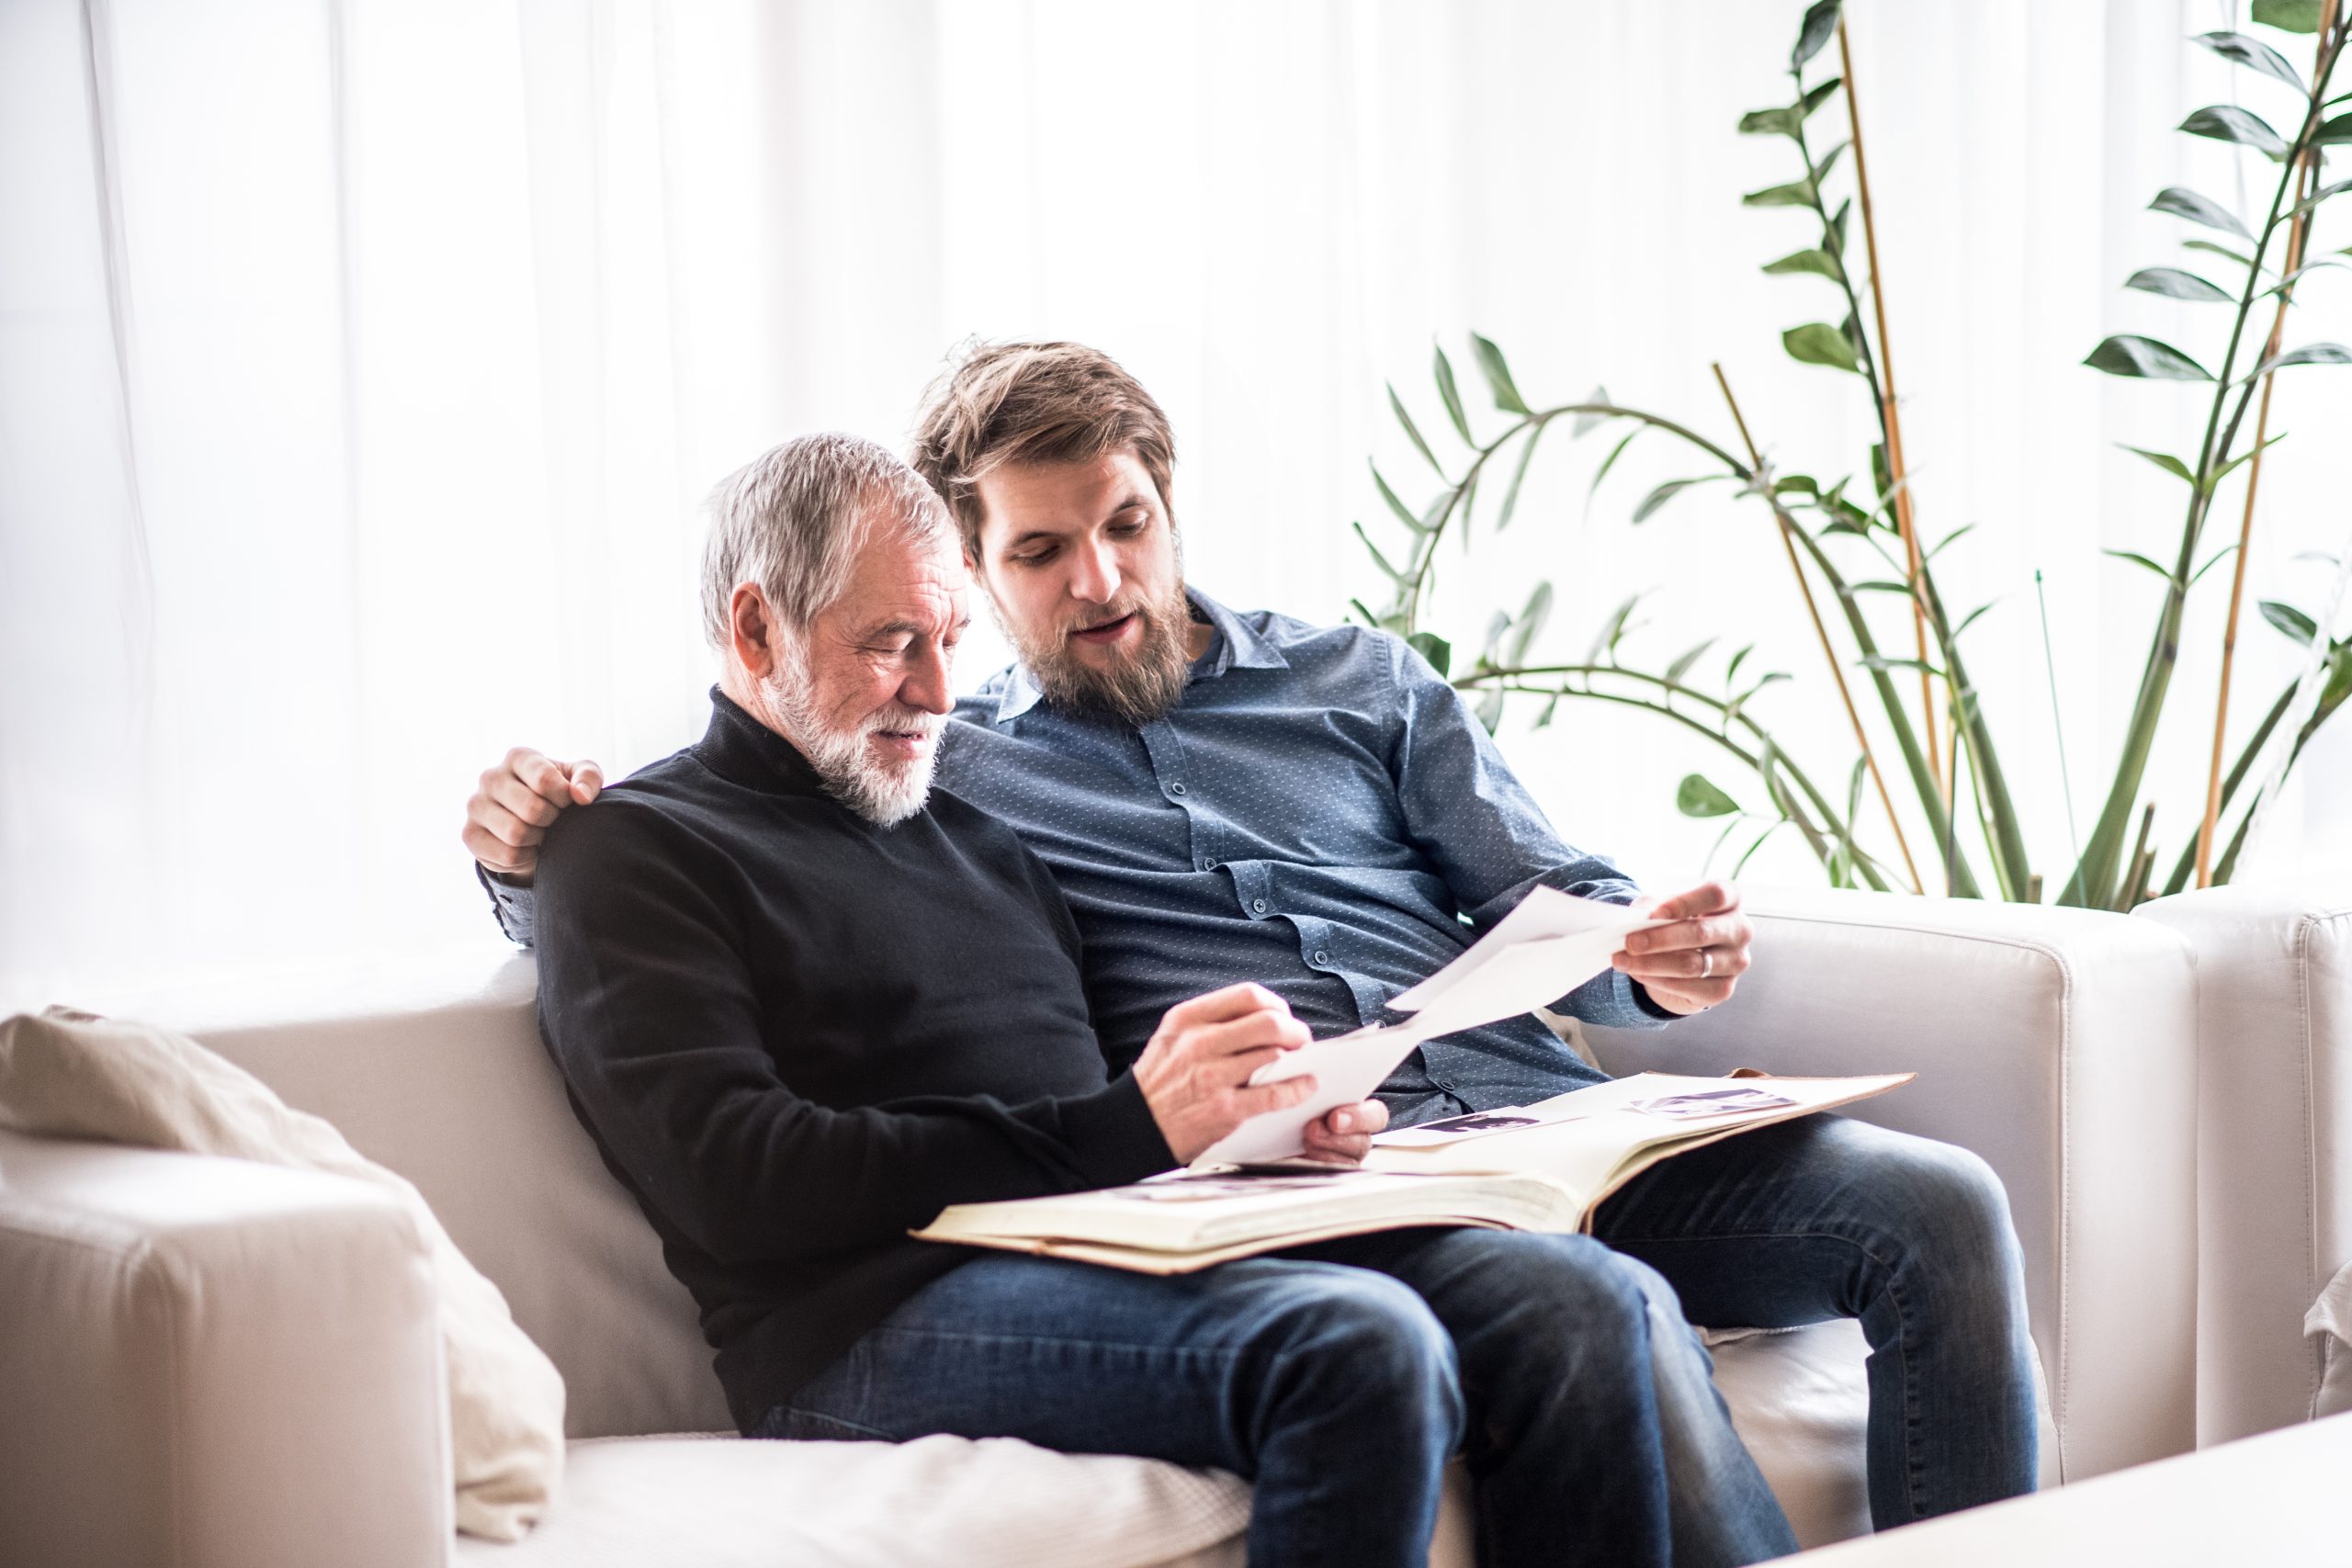 Discussing Placement into Assisted Living with Your Parents